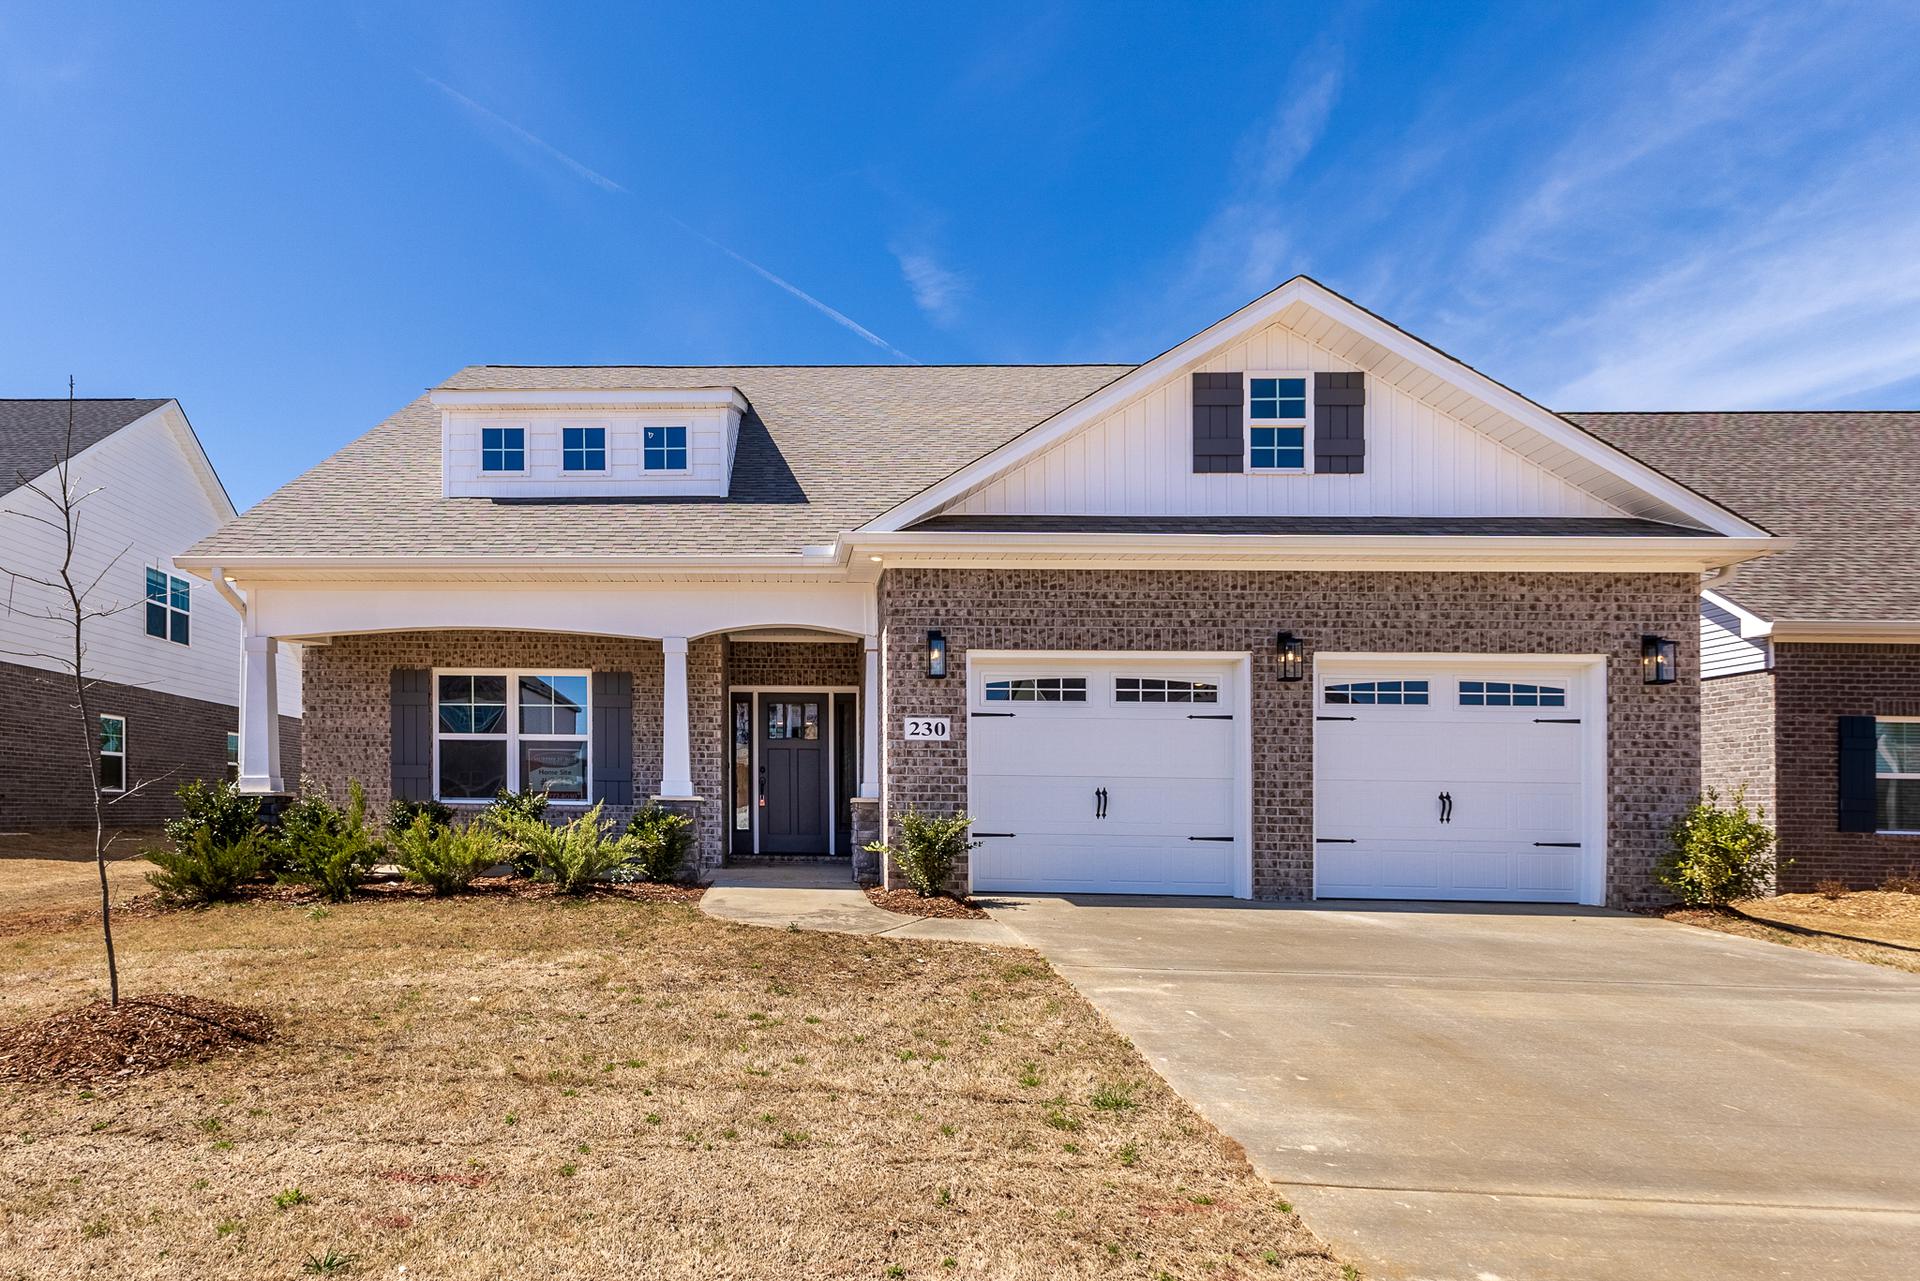 4br New Home in Athens, AL